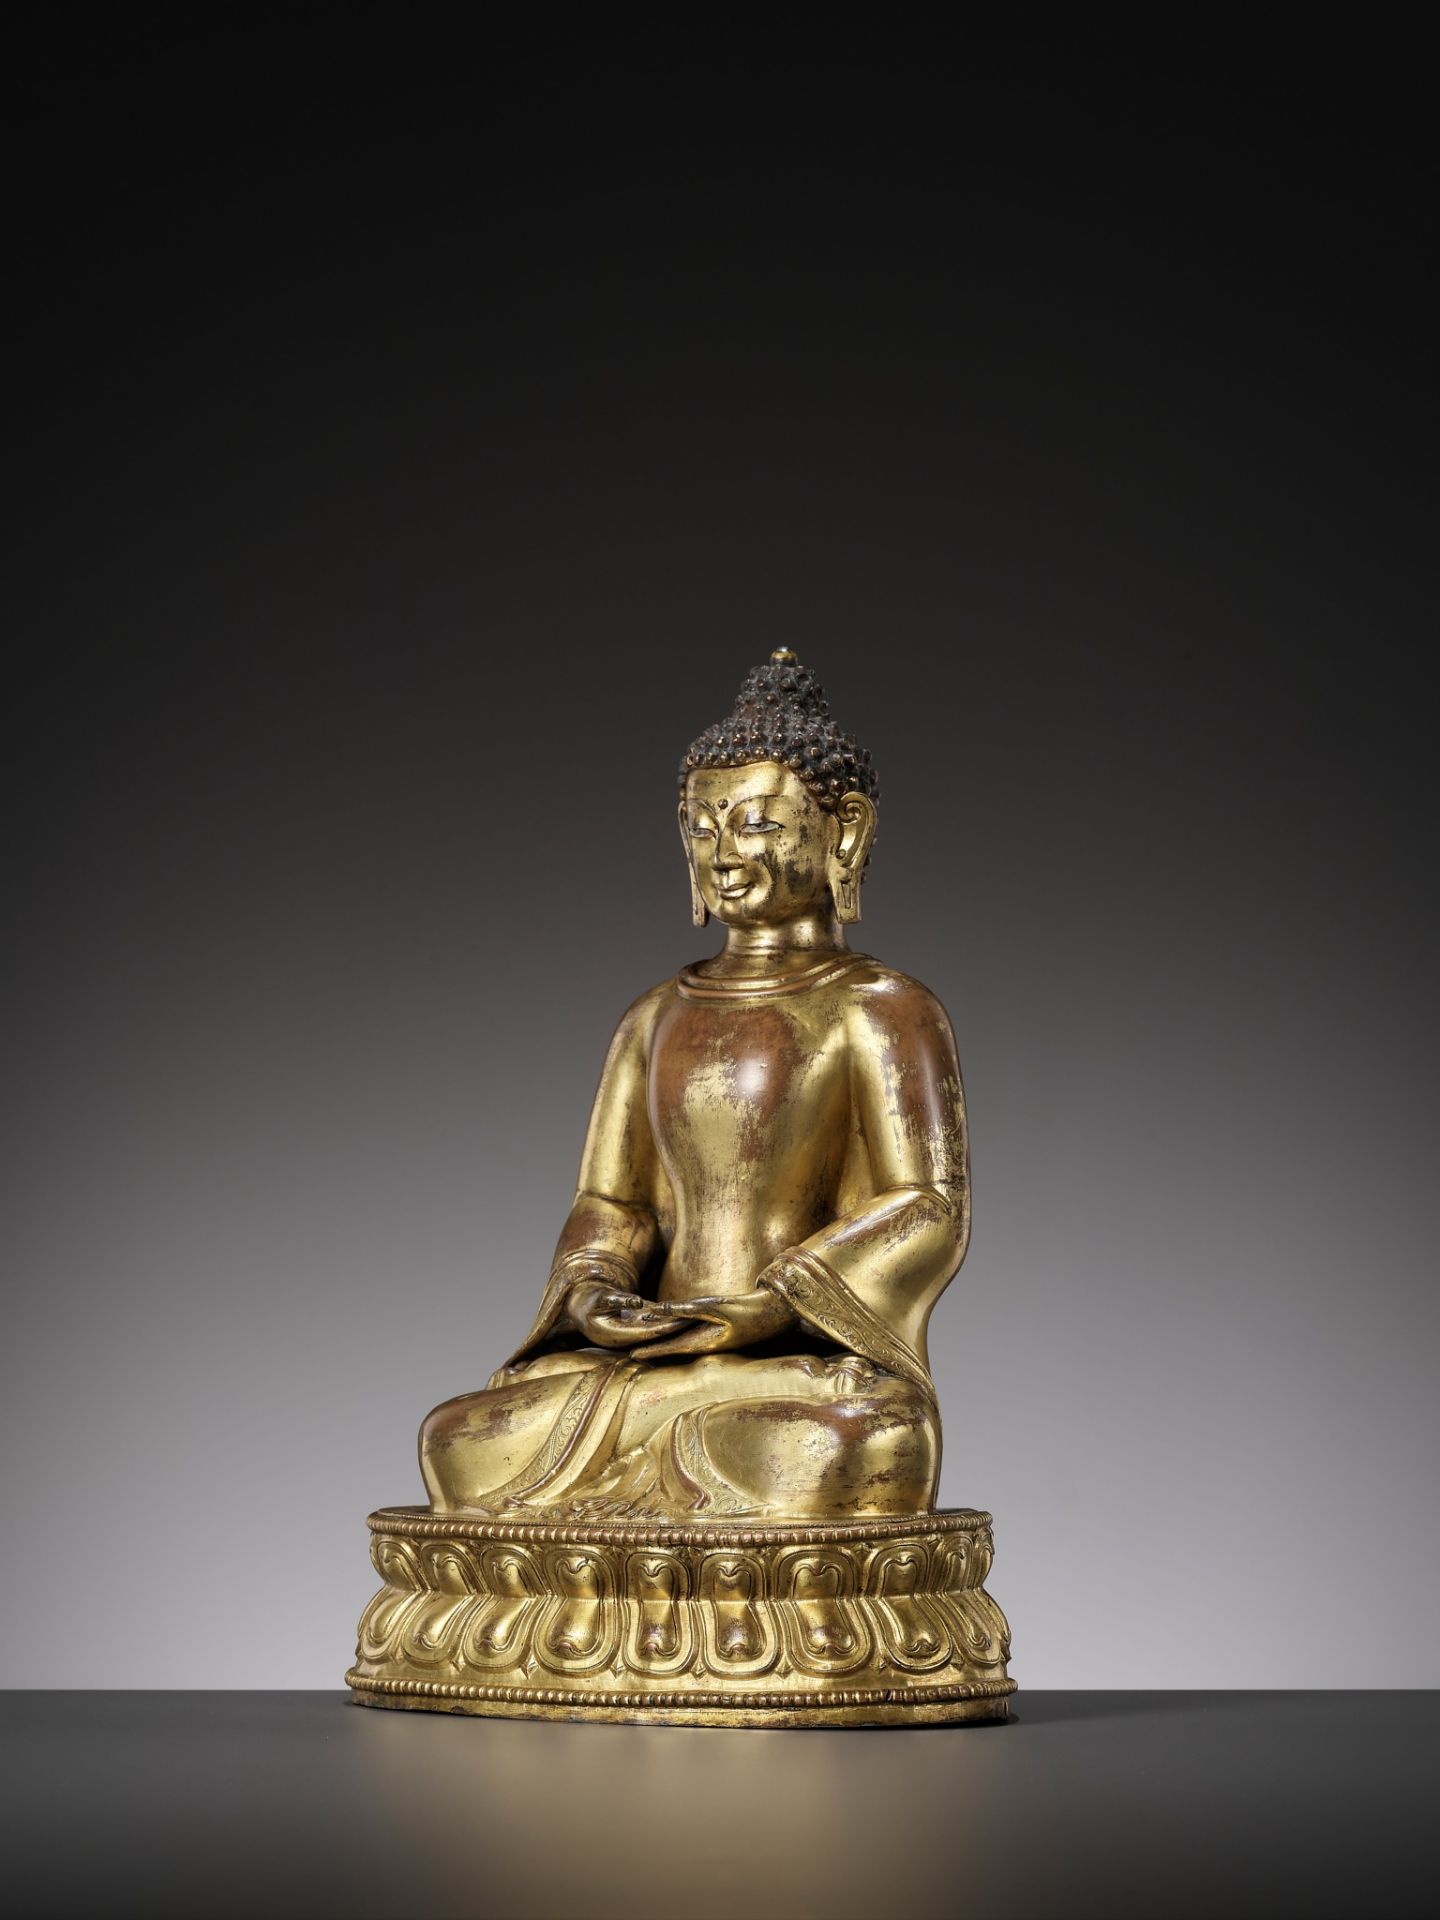 A GILT COPPER-ALLOY REPOUSSE FIGURE OF BUDDHA AMITABHA, WITH AN INSCRIPTION REFERRING TO THE SECOND - Image 7 of 16